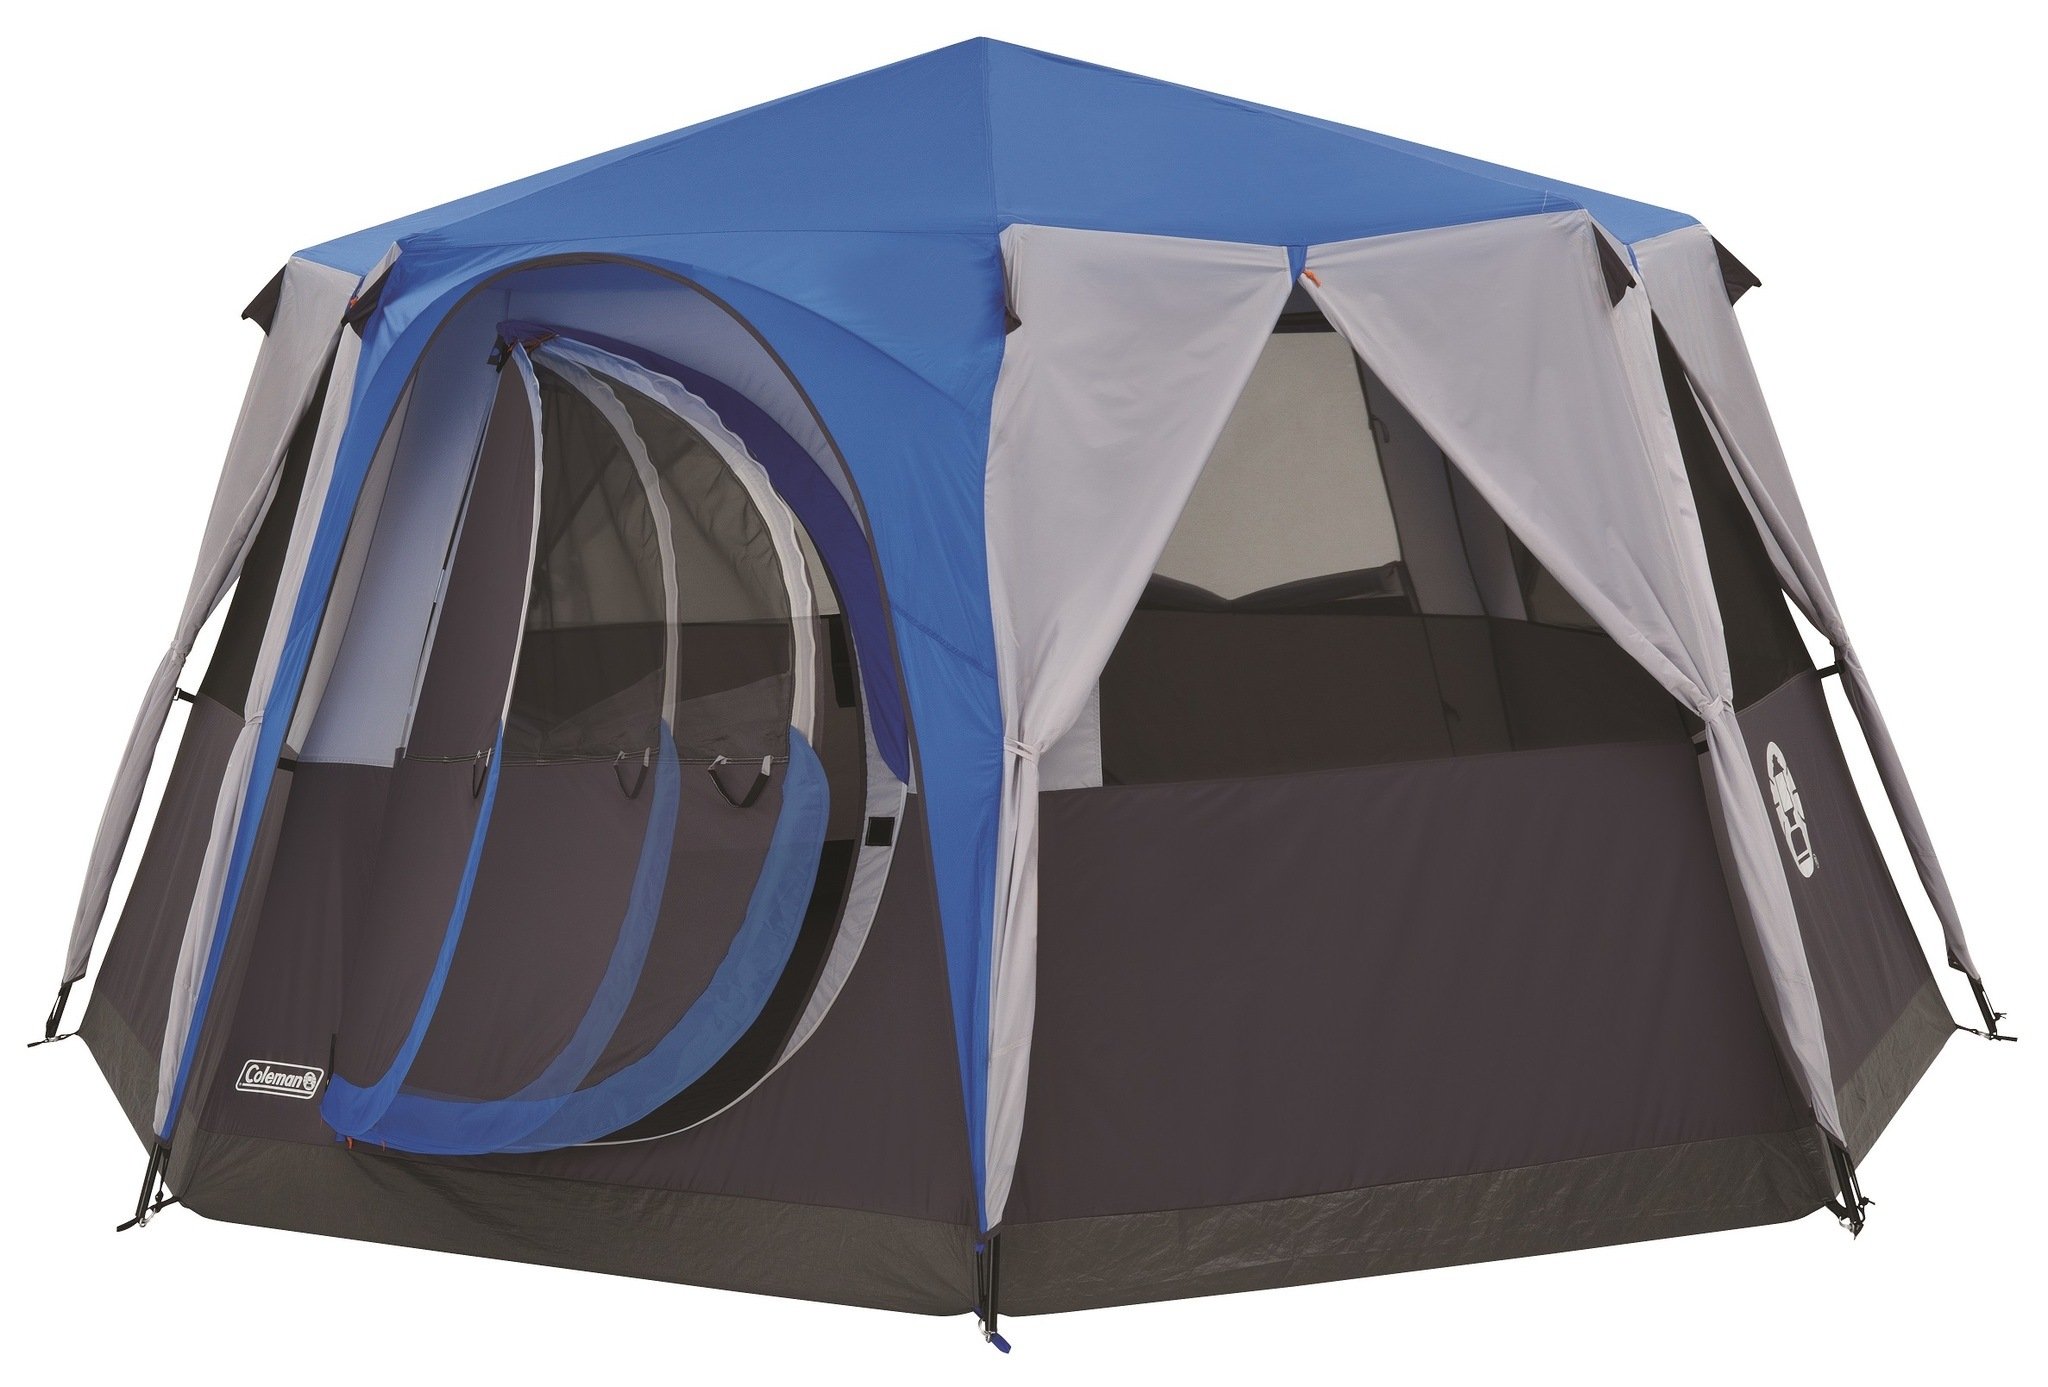 Tent with blinds open